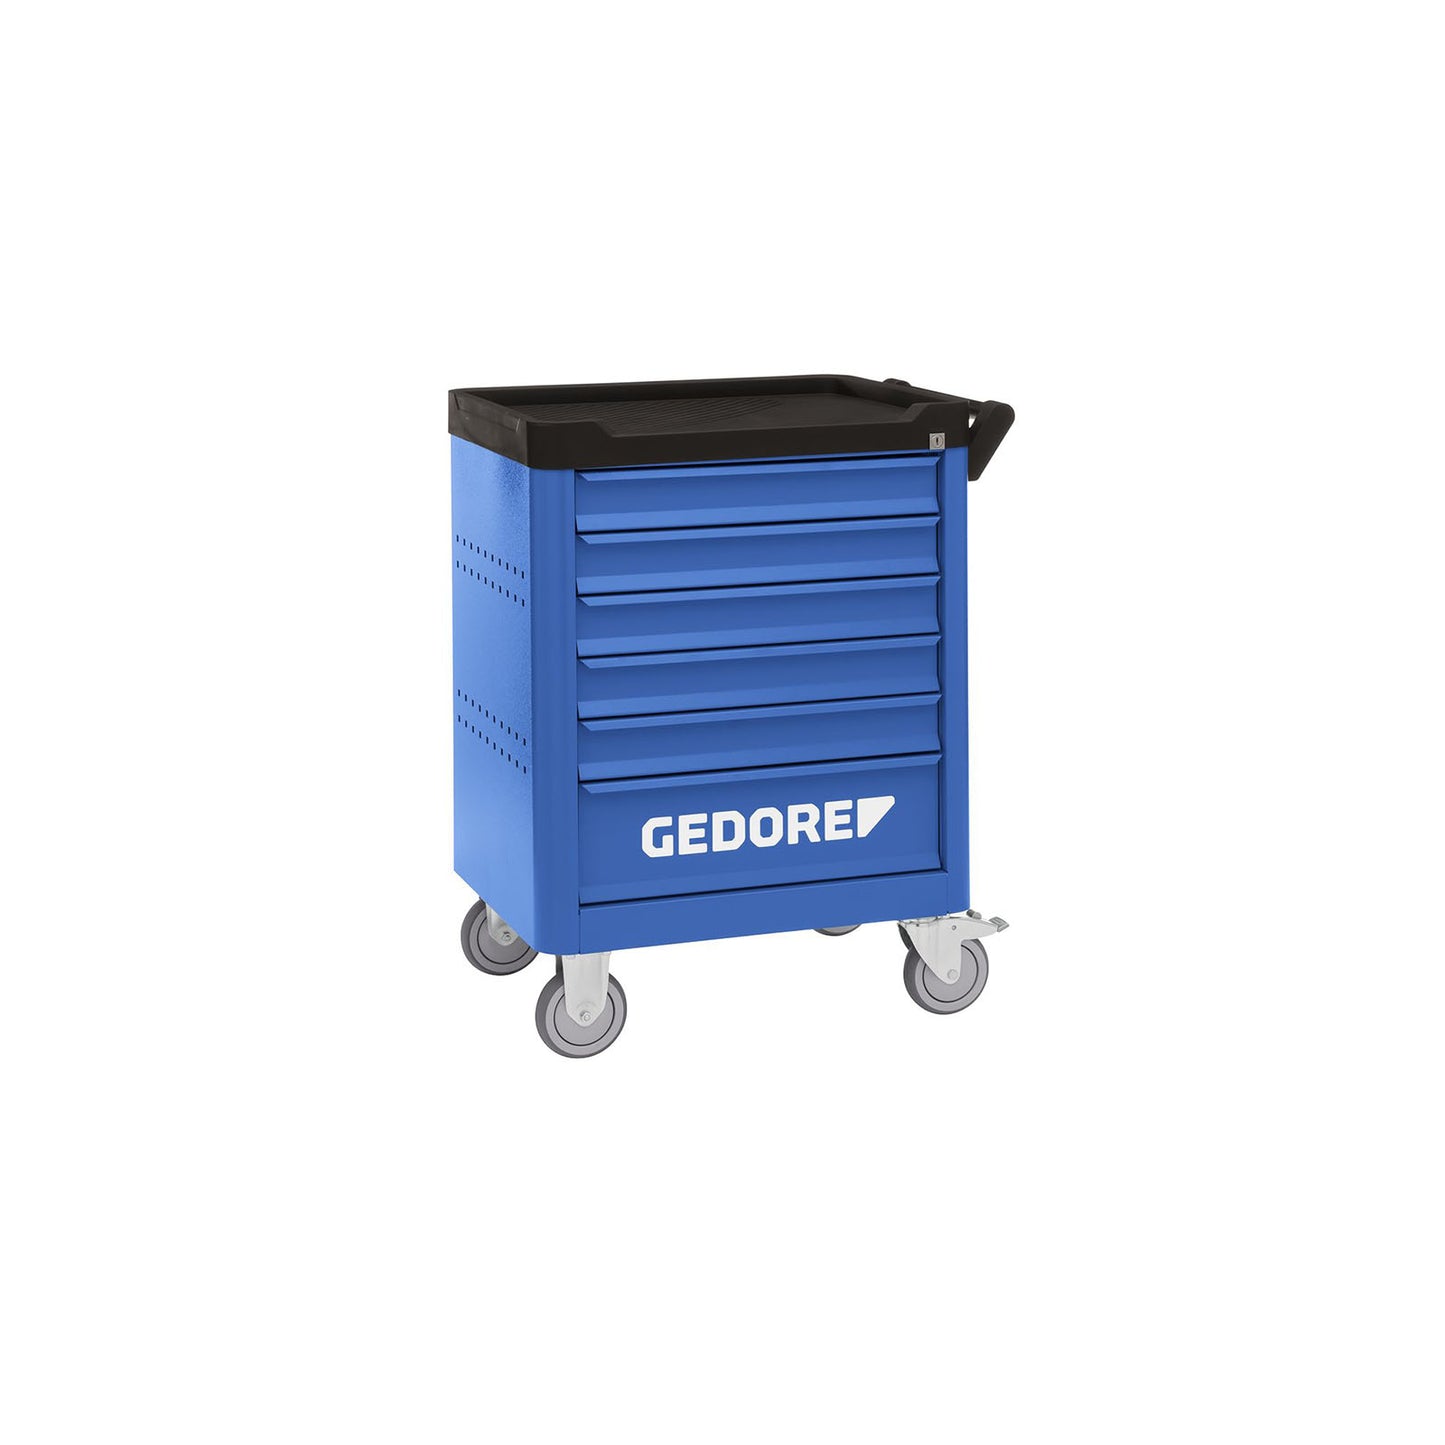 GEDORE WSL-M-TS-172 - Trolley with assortment of 172 tools (3100197) 